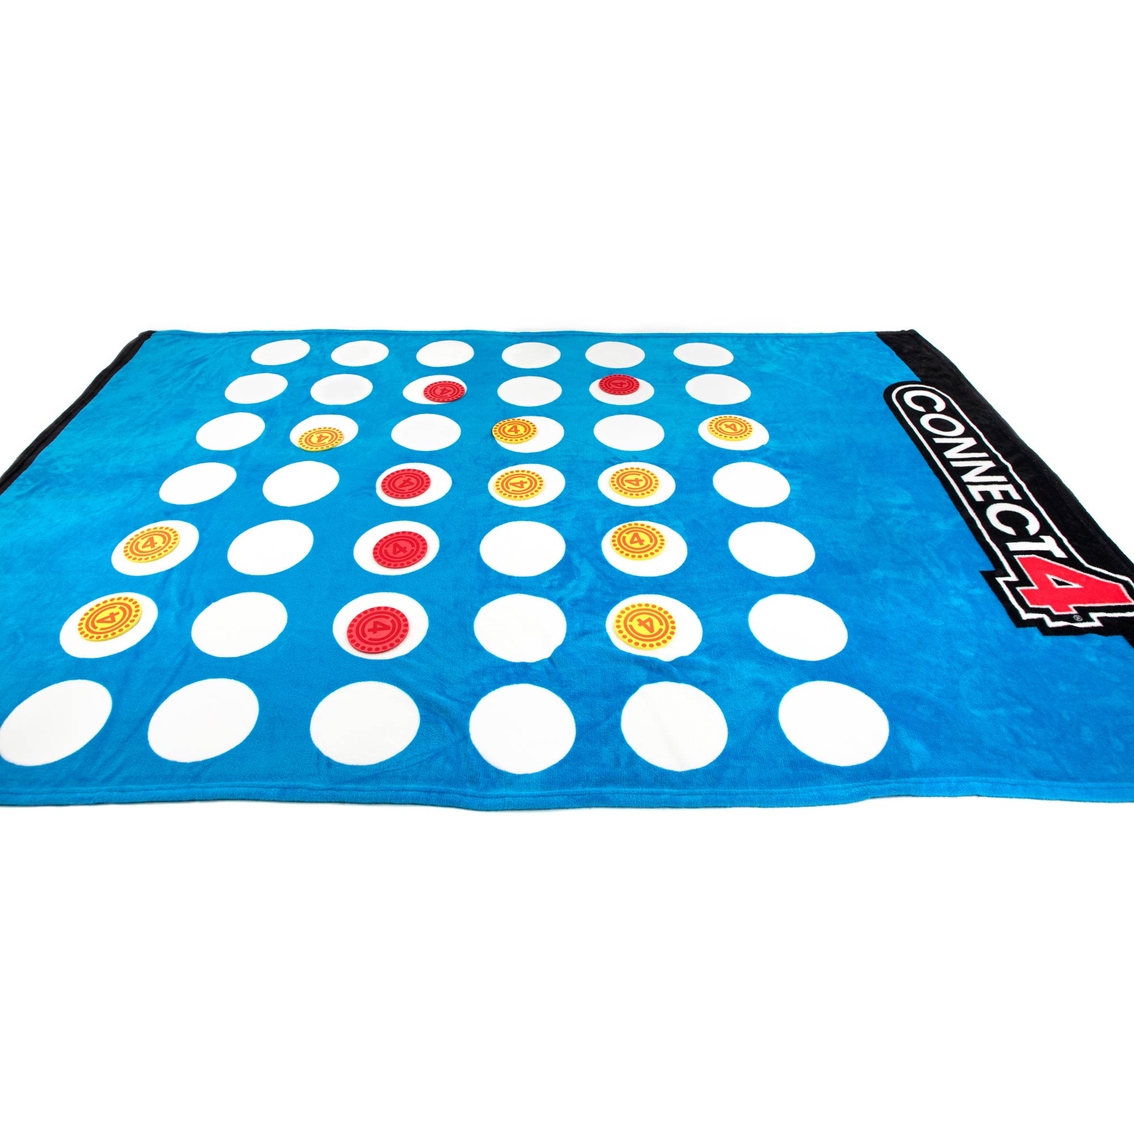 Hasbro Connect 4 Game Blanket 60 x 90 - Image 2 of 7